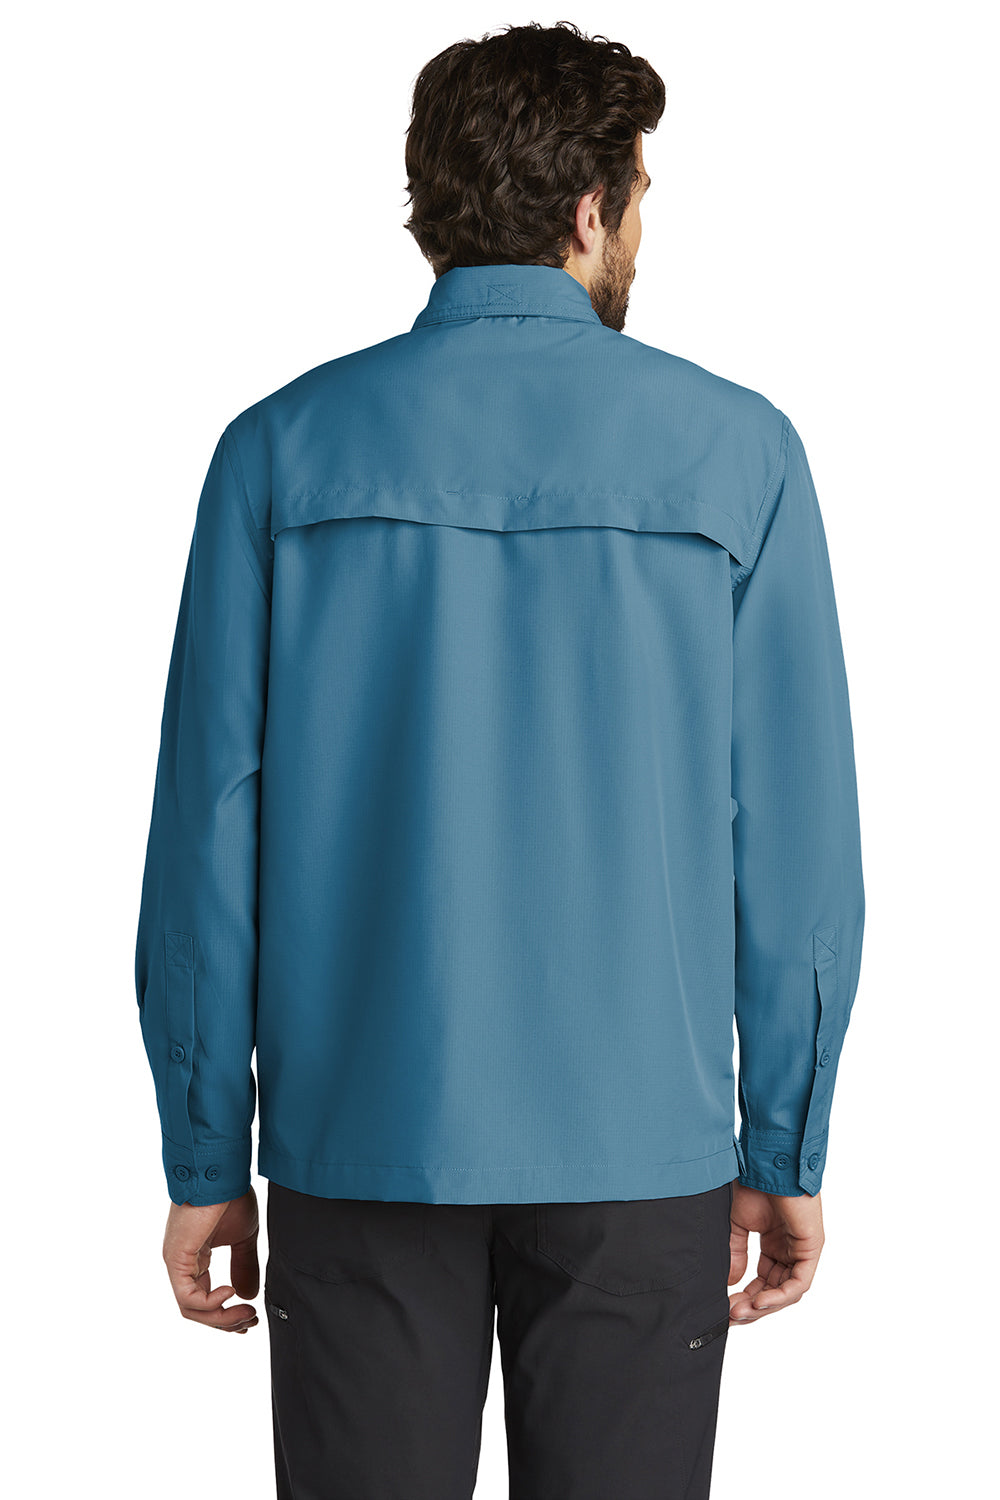 Eddie Bauer EB600 Mens Performance Fishing Moisture Wicking Long Sleeve Button Down Shirt w/ Double Pockets Gulf Teal Blue Model Back